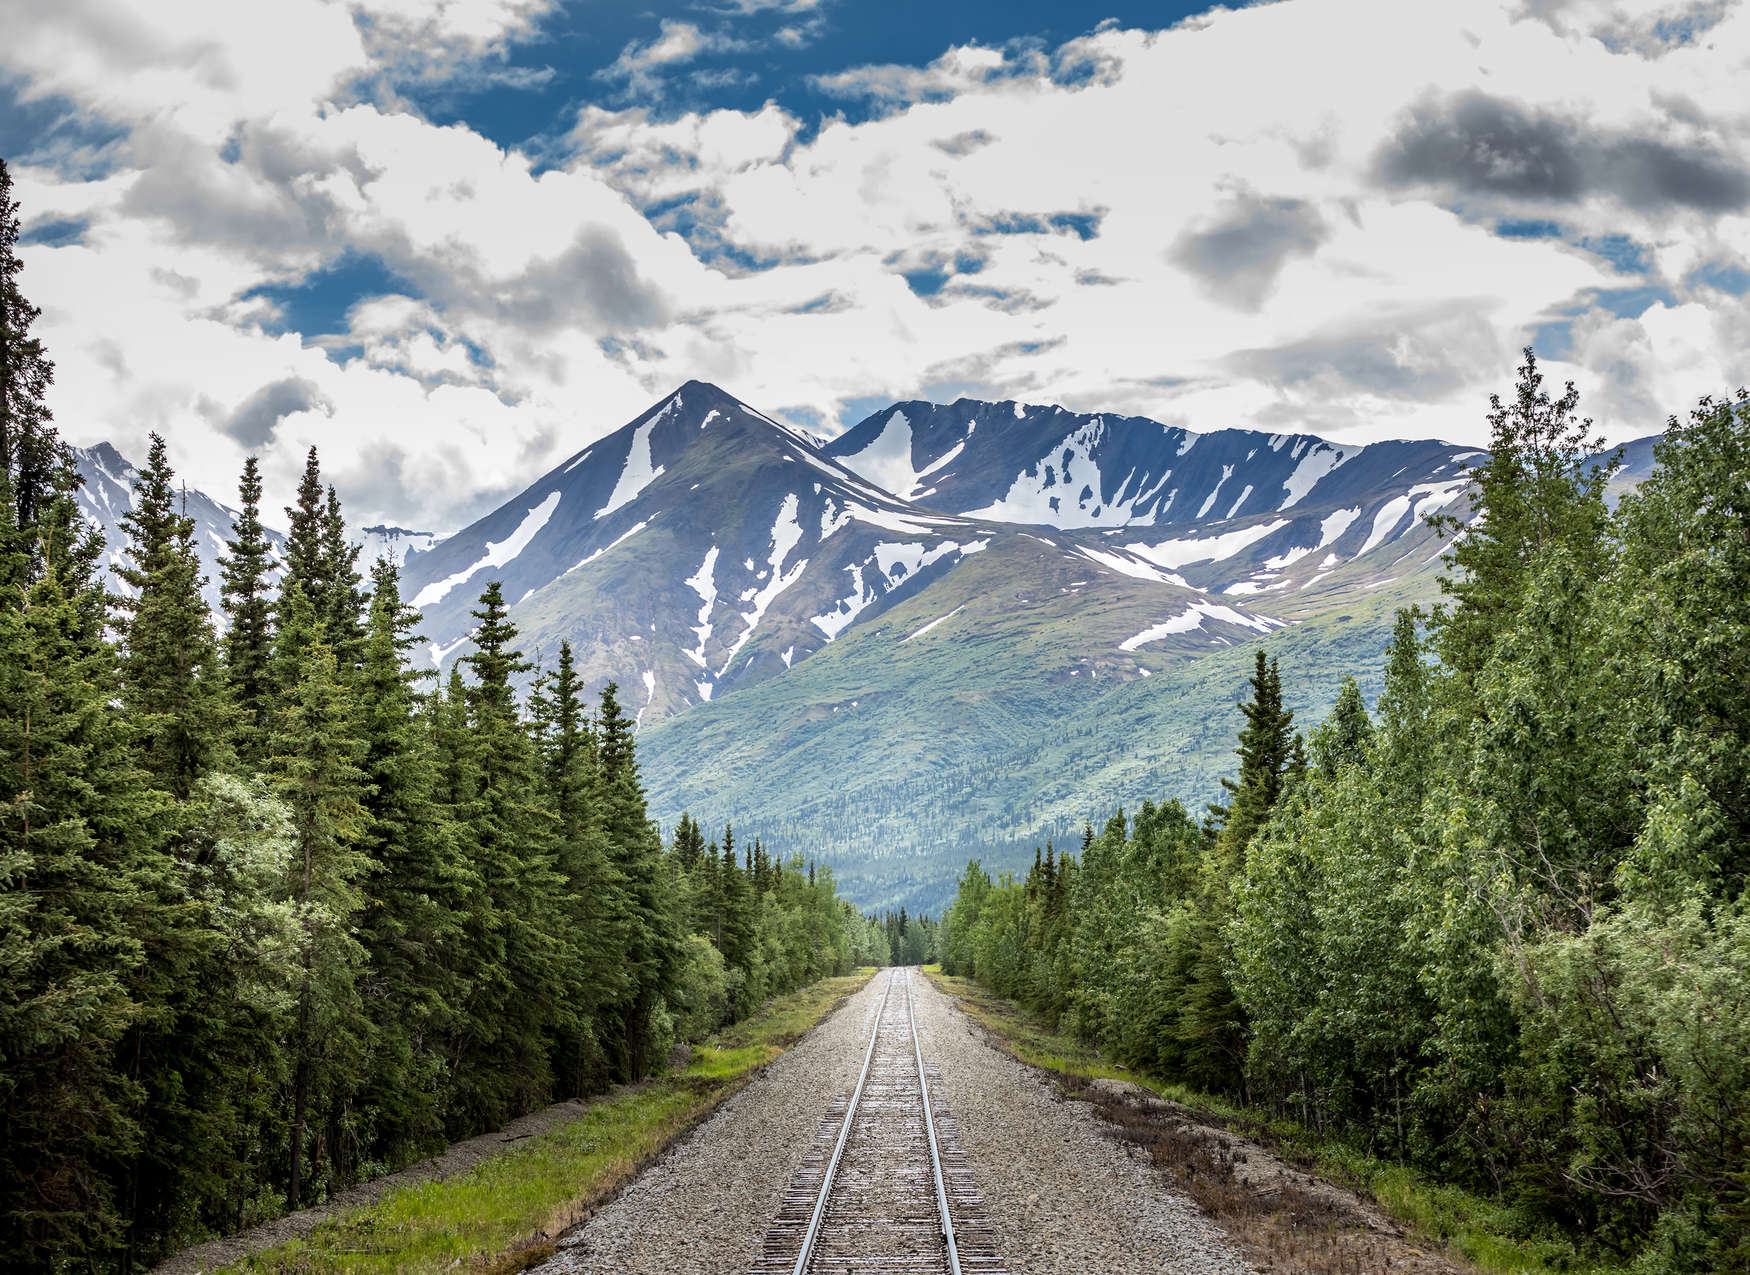             Photo wallpaper with train tracks through a forest by the mountains - Green, Blue, Grey
        